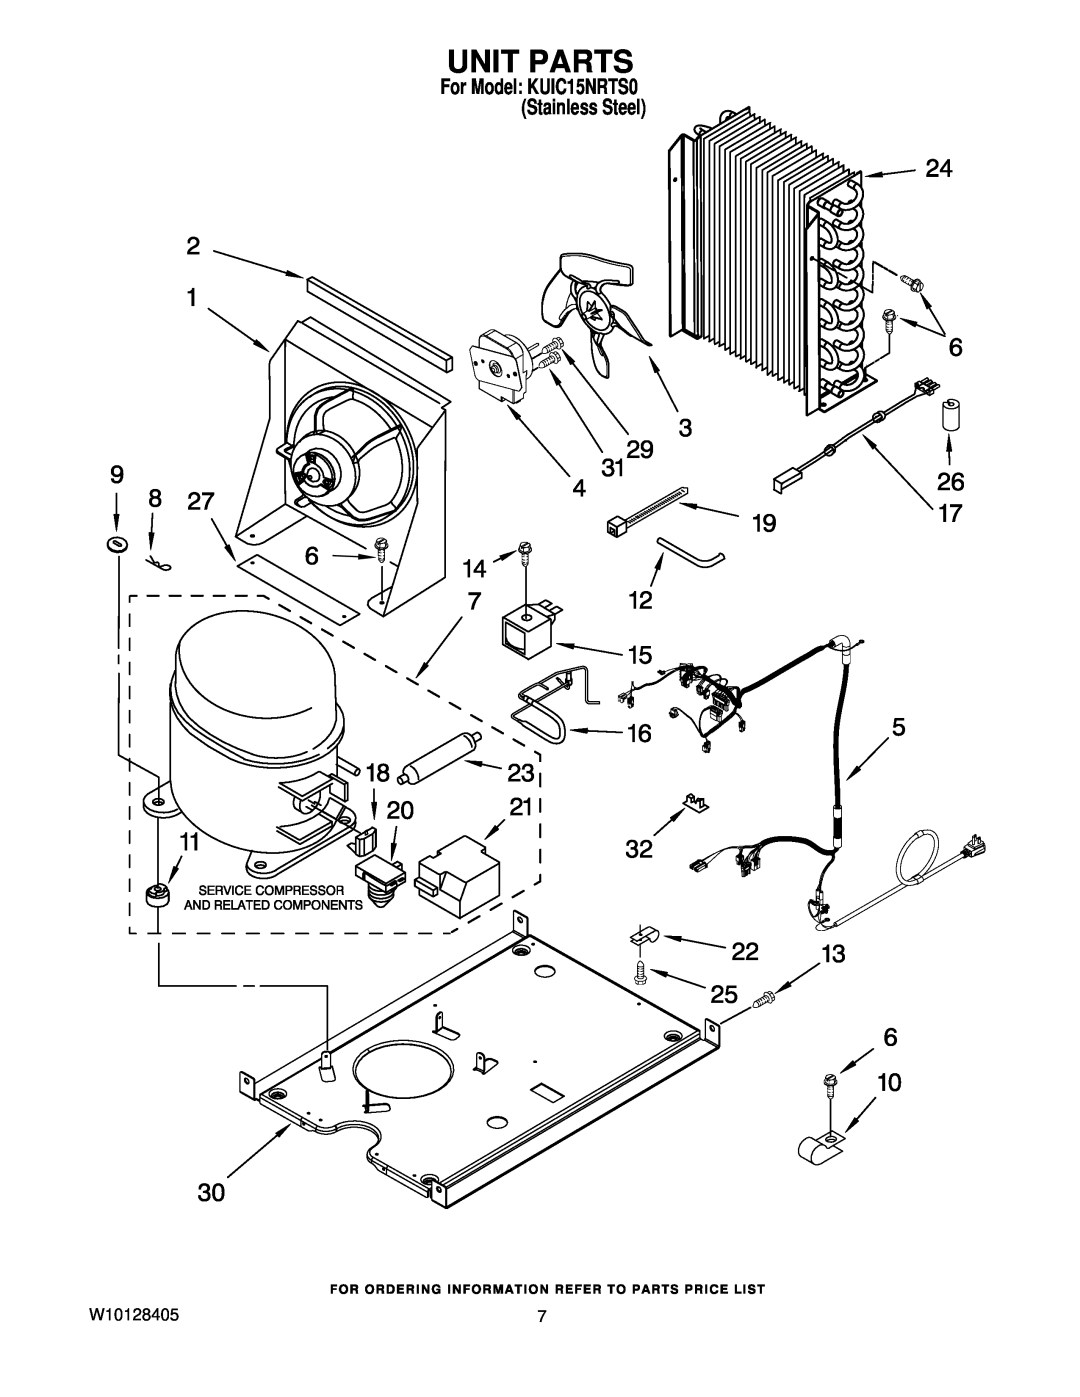 KitchenAid manual Unit Parts, W10128405, For Model KUIC15NRTS0 Stainless Steel 